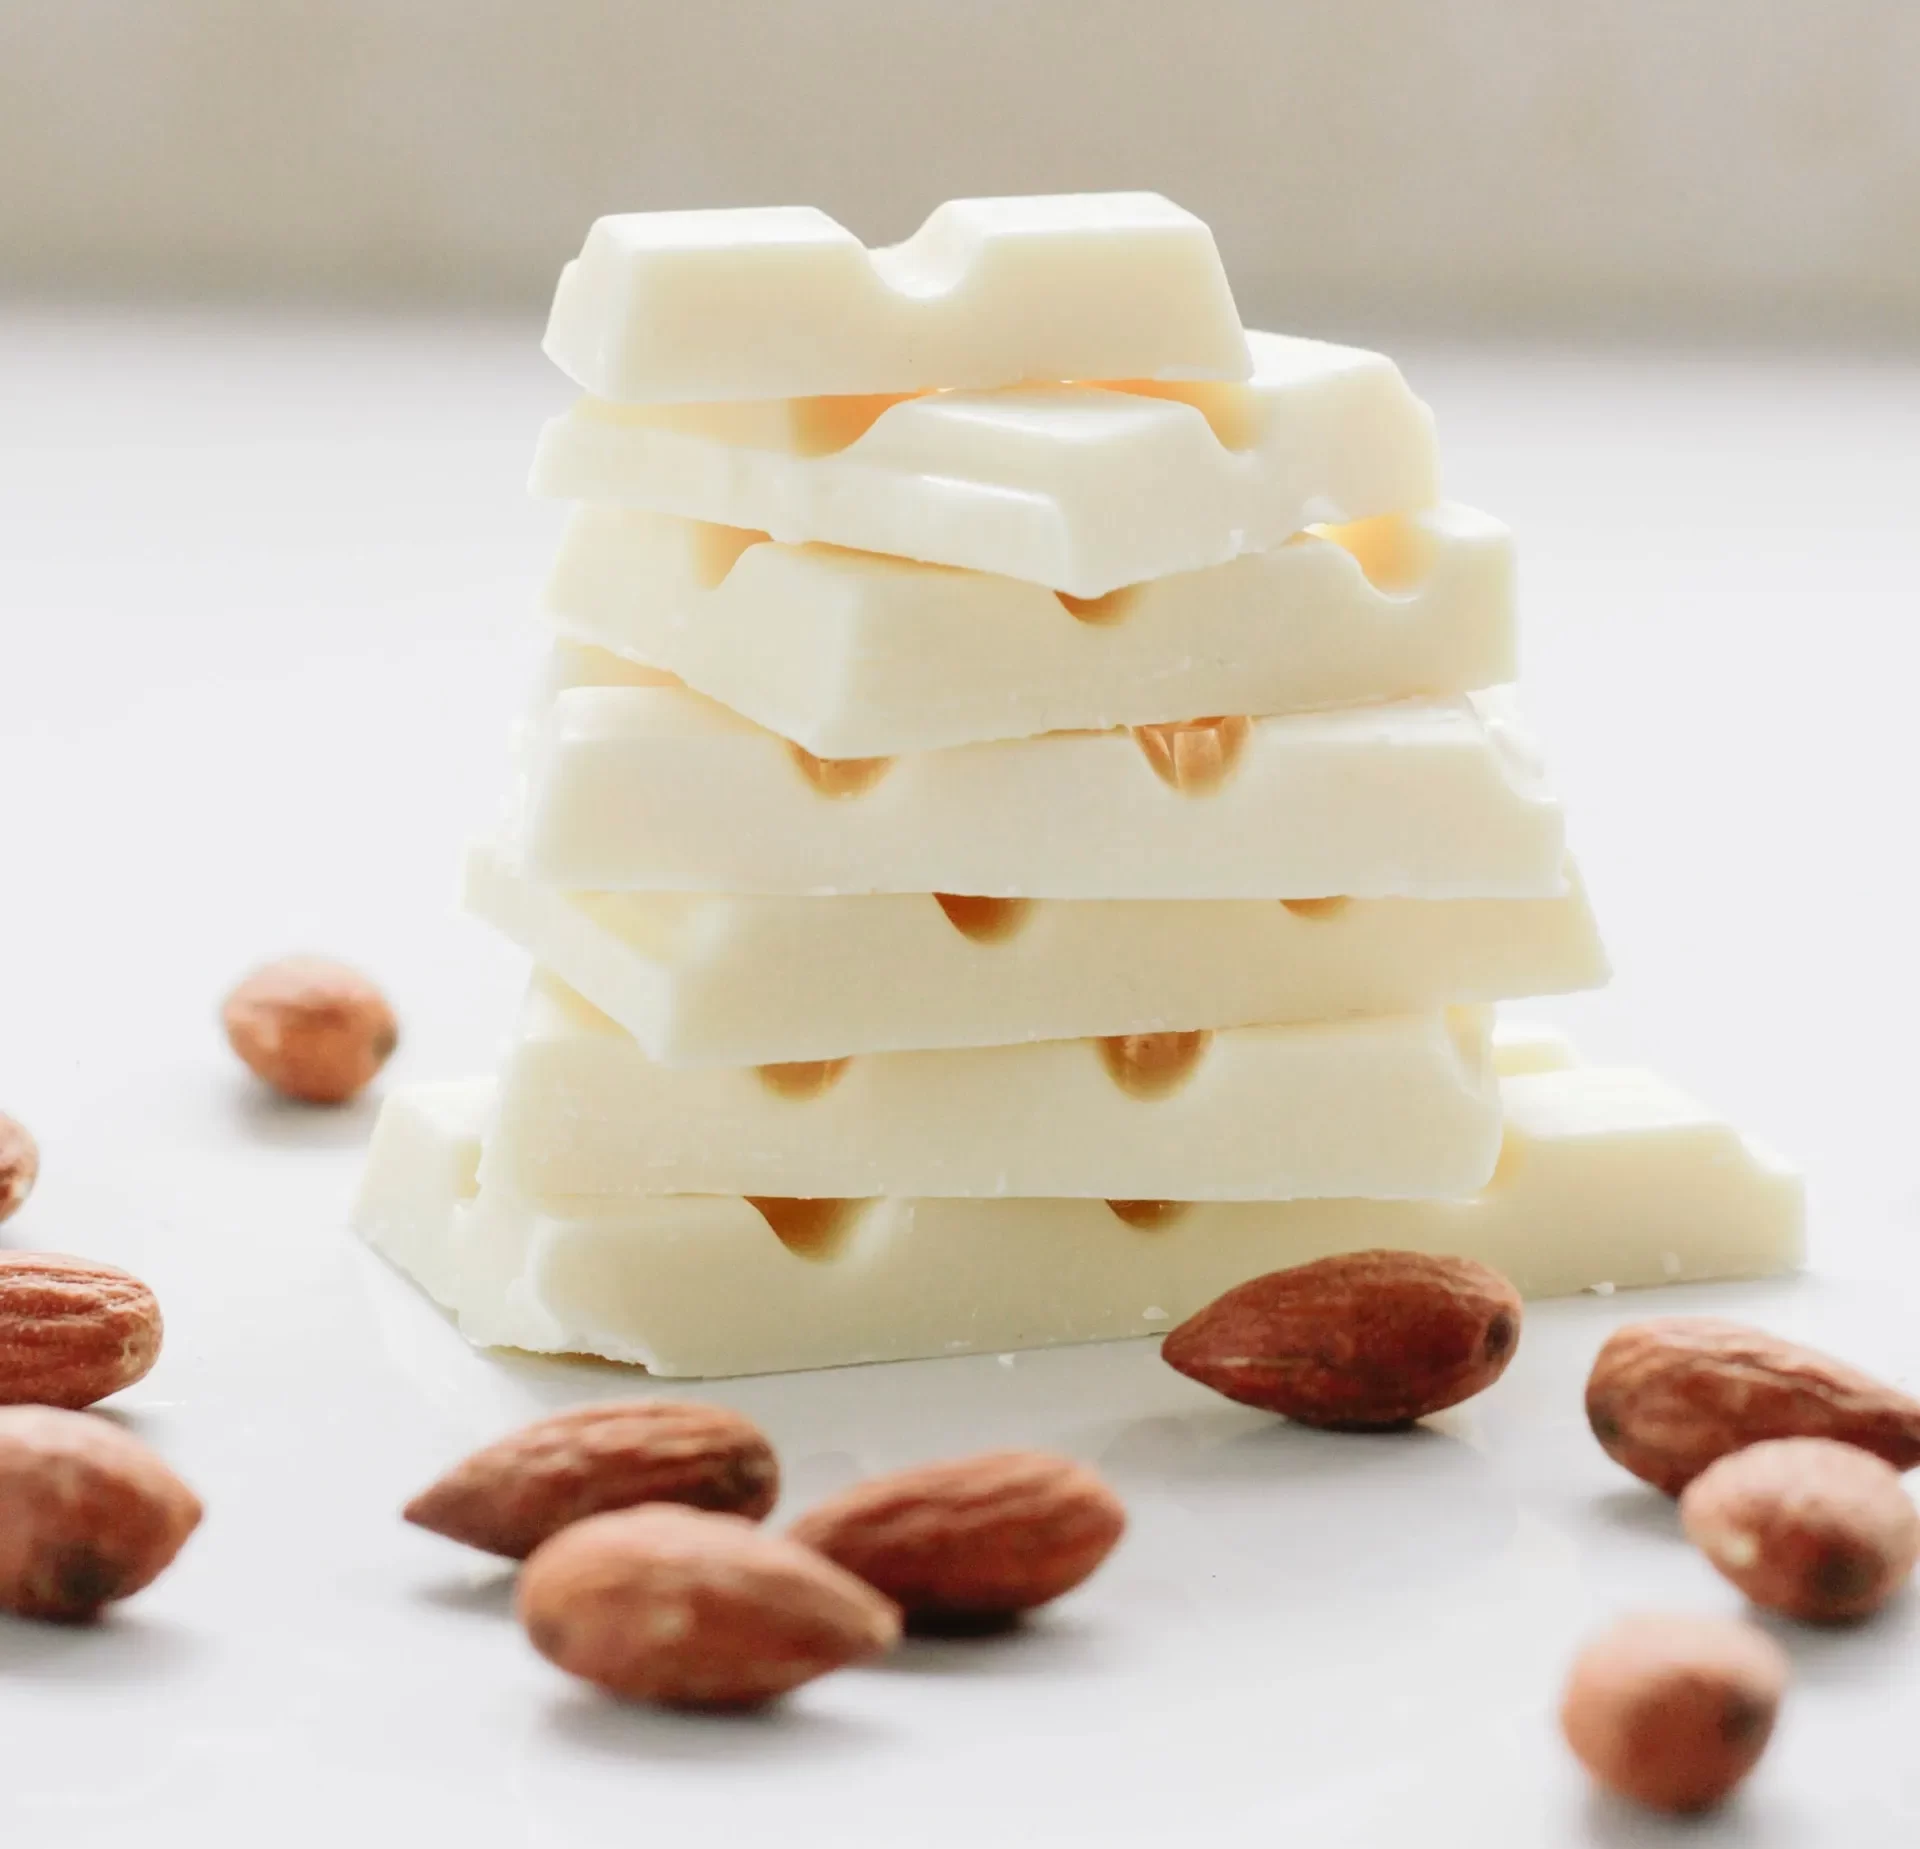 White chocolate - great for white chocolate fountains at parties and events.